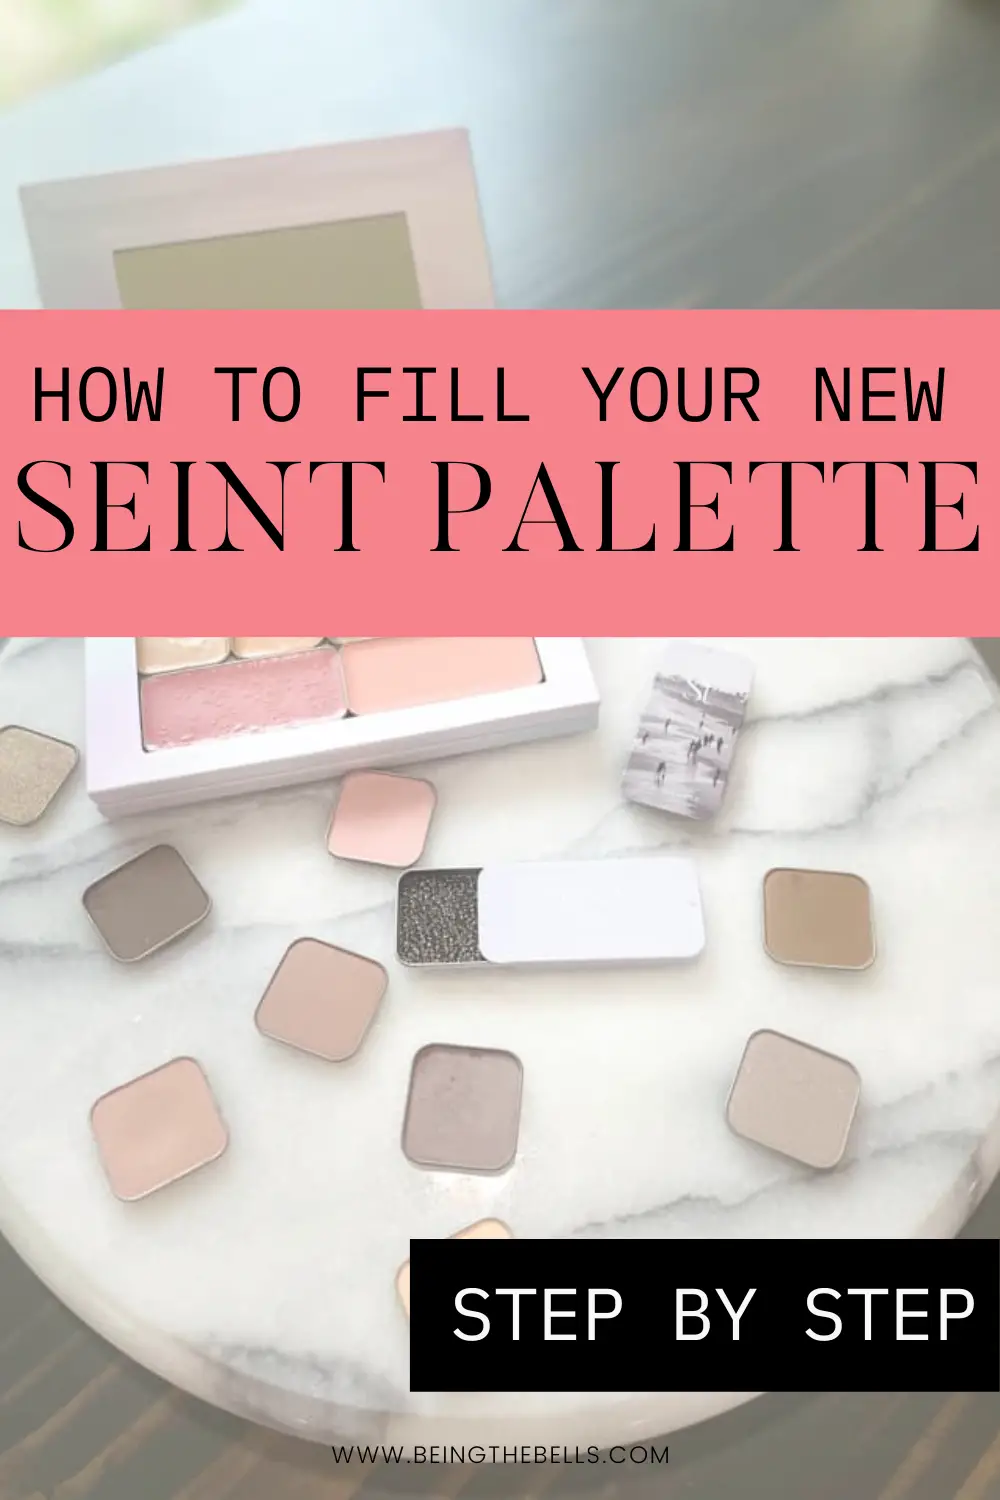 How to Fill a Seint Palette